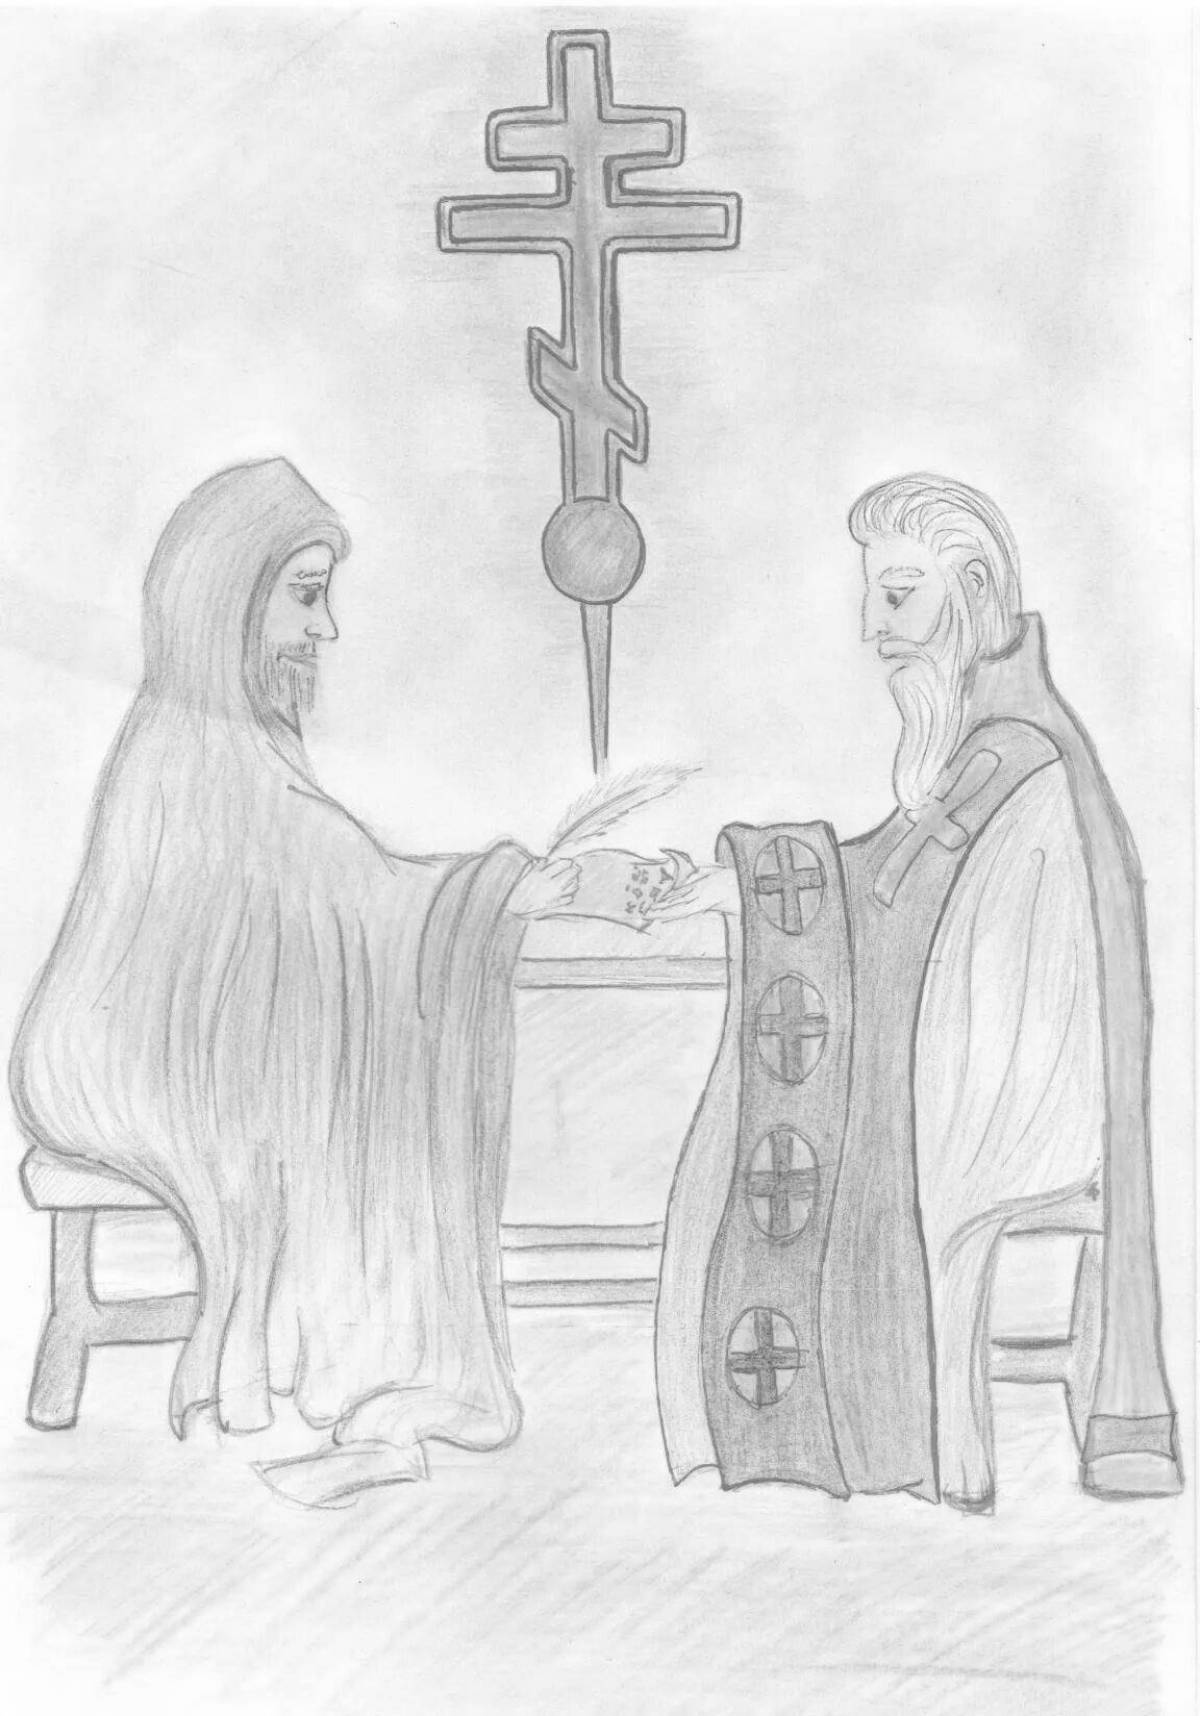 Coloring page glorious cyril and methodius